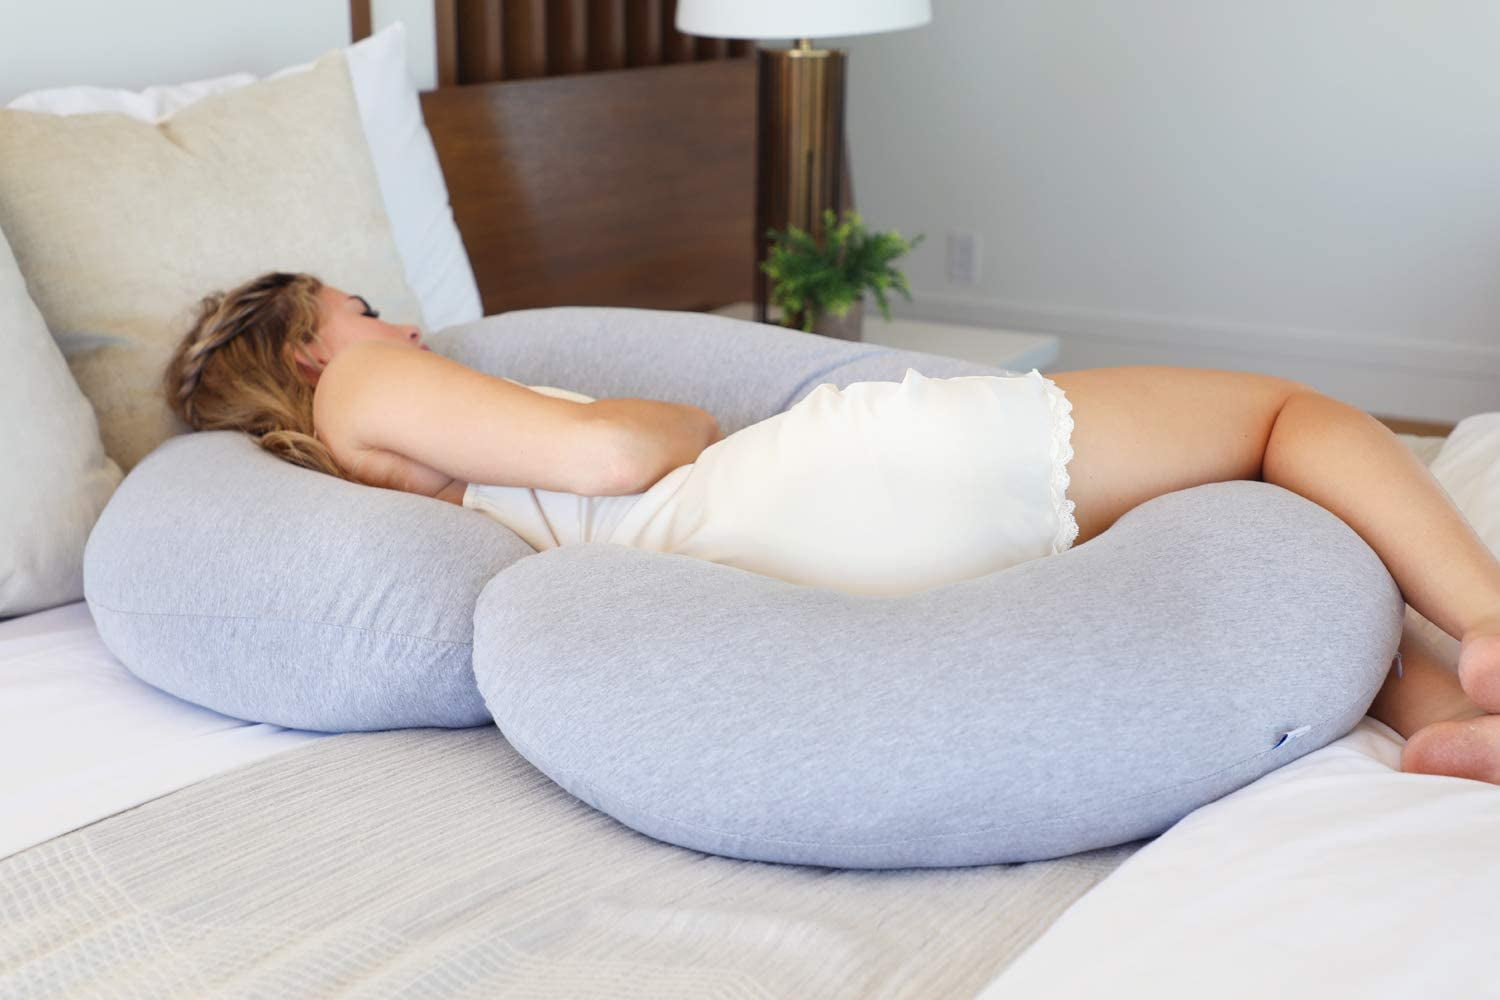  Restorology, Pregnancy Pillow - 60 Inch, C-Shaped Maternity  Pillows for Sleeping - Full Body Pillow for Pregnant Women - Reduces Hip,  Back Pain for Side & Stomach Sleepers - Washable Cover : Baby